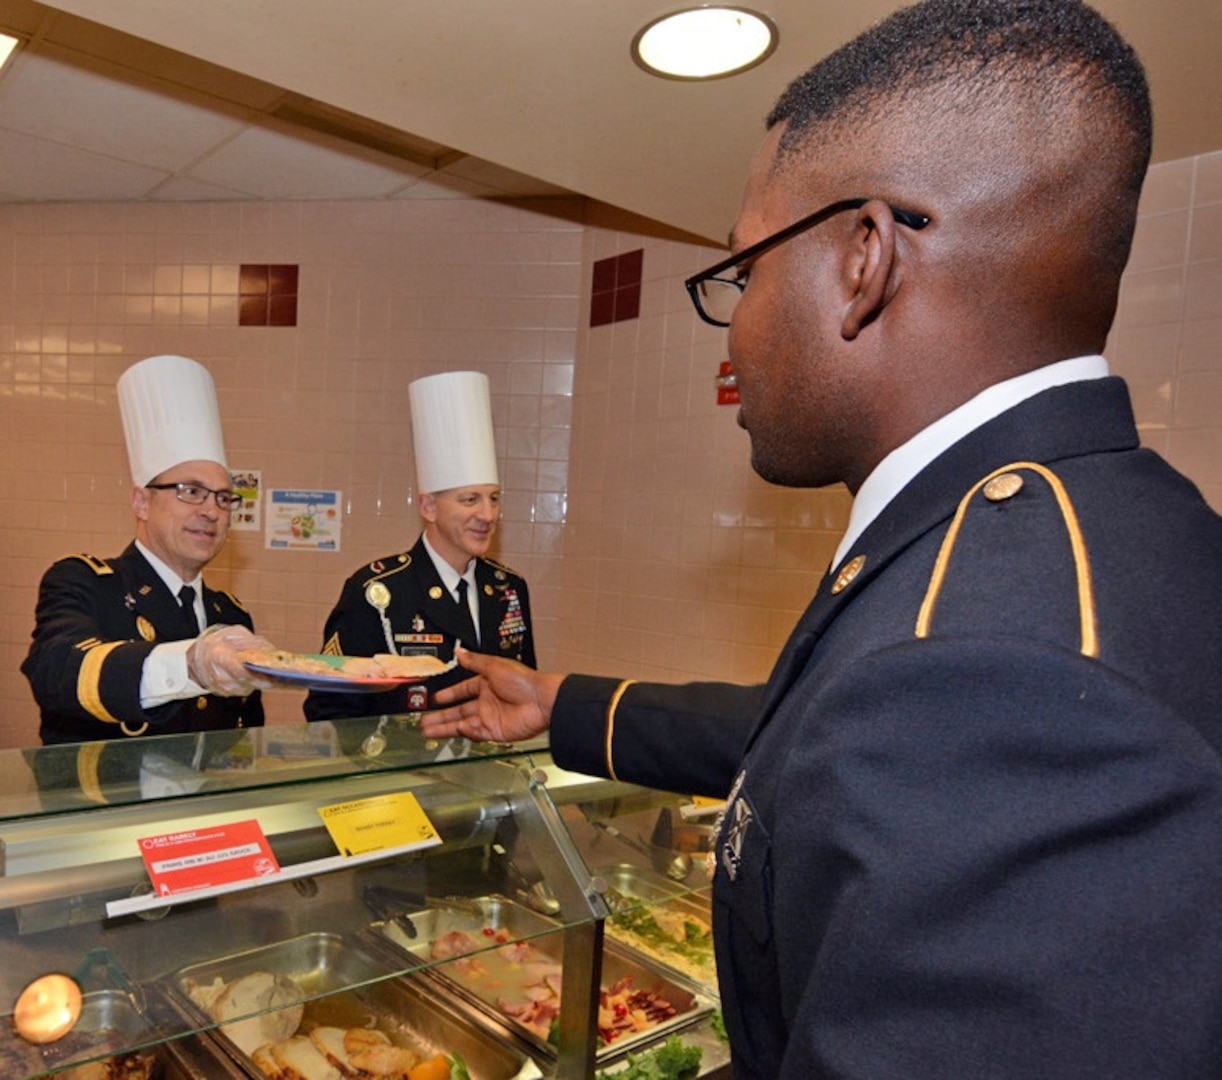 Maj. Gen. Brian C. Lein, Commanding General, Army Medical Department Center & School at Joint Base San Antonio-Fort Sam Houston, AMEDDC&S Command Sgt. Maj. Buck O'Neal and other leaders serve Thanksgiving dinner to Soldiers at the Rocco Dining Facility at JBSA-Fort Sam Houston Nov. 23.